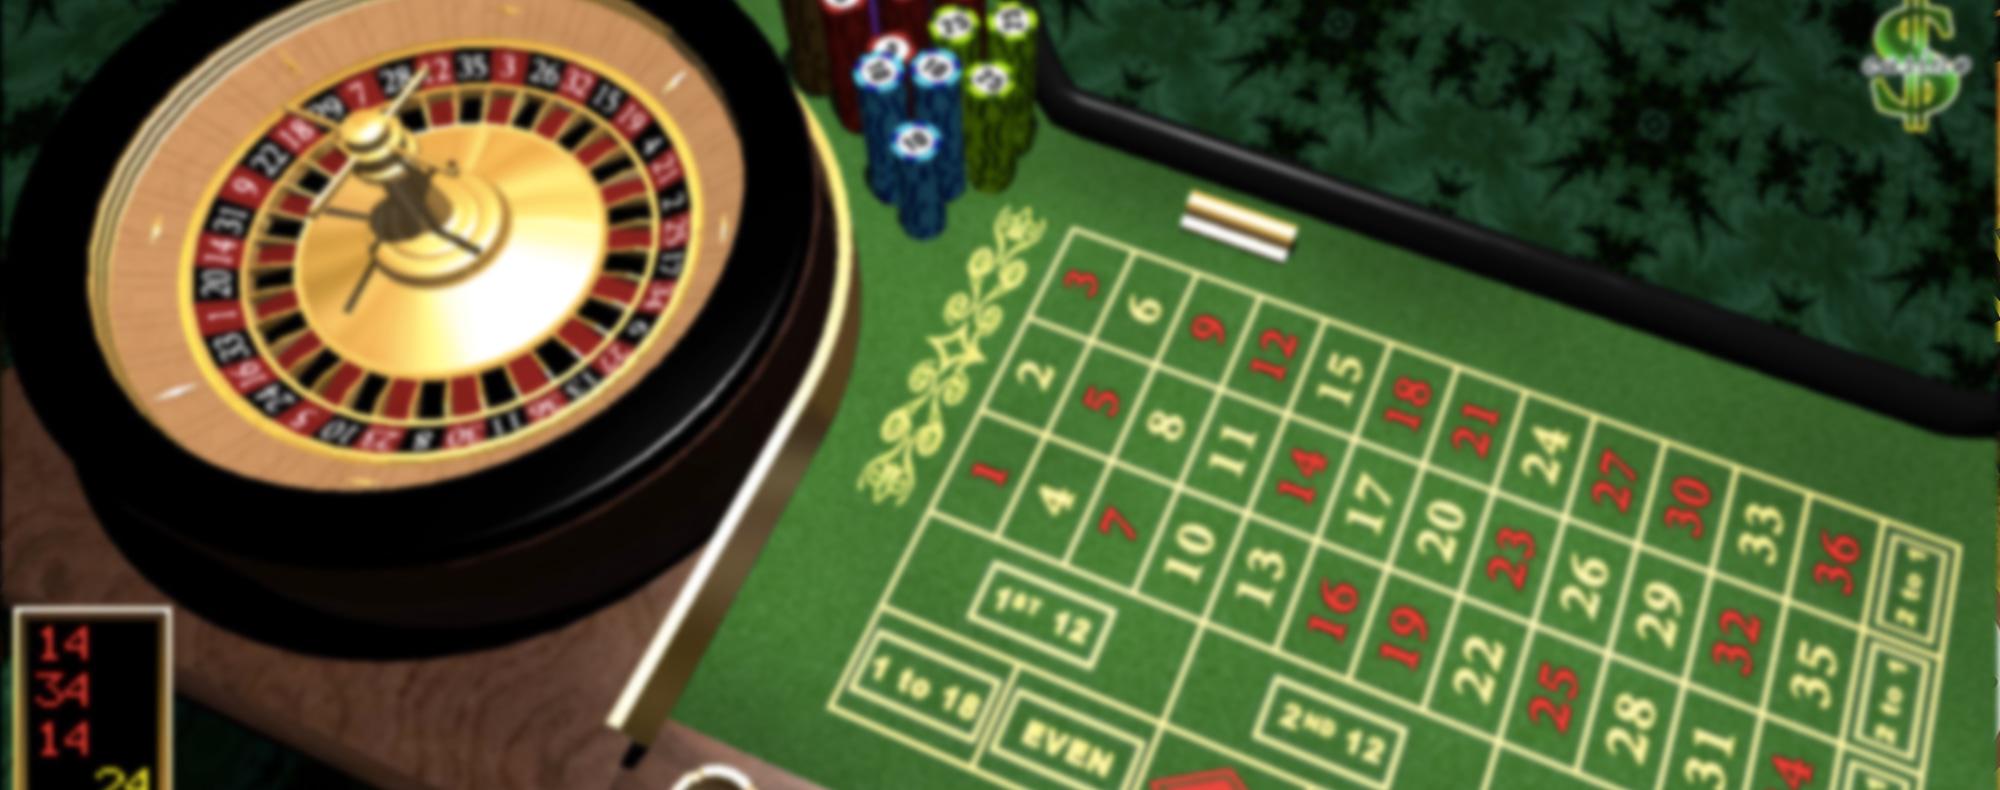 new 2018 us approved online casinos